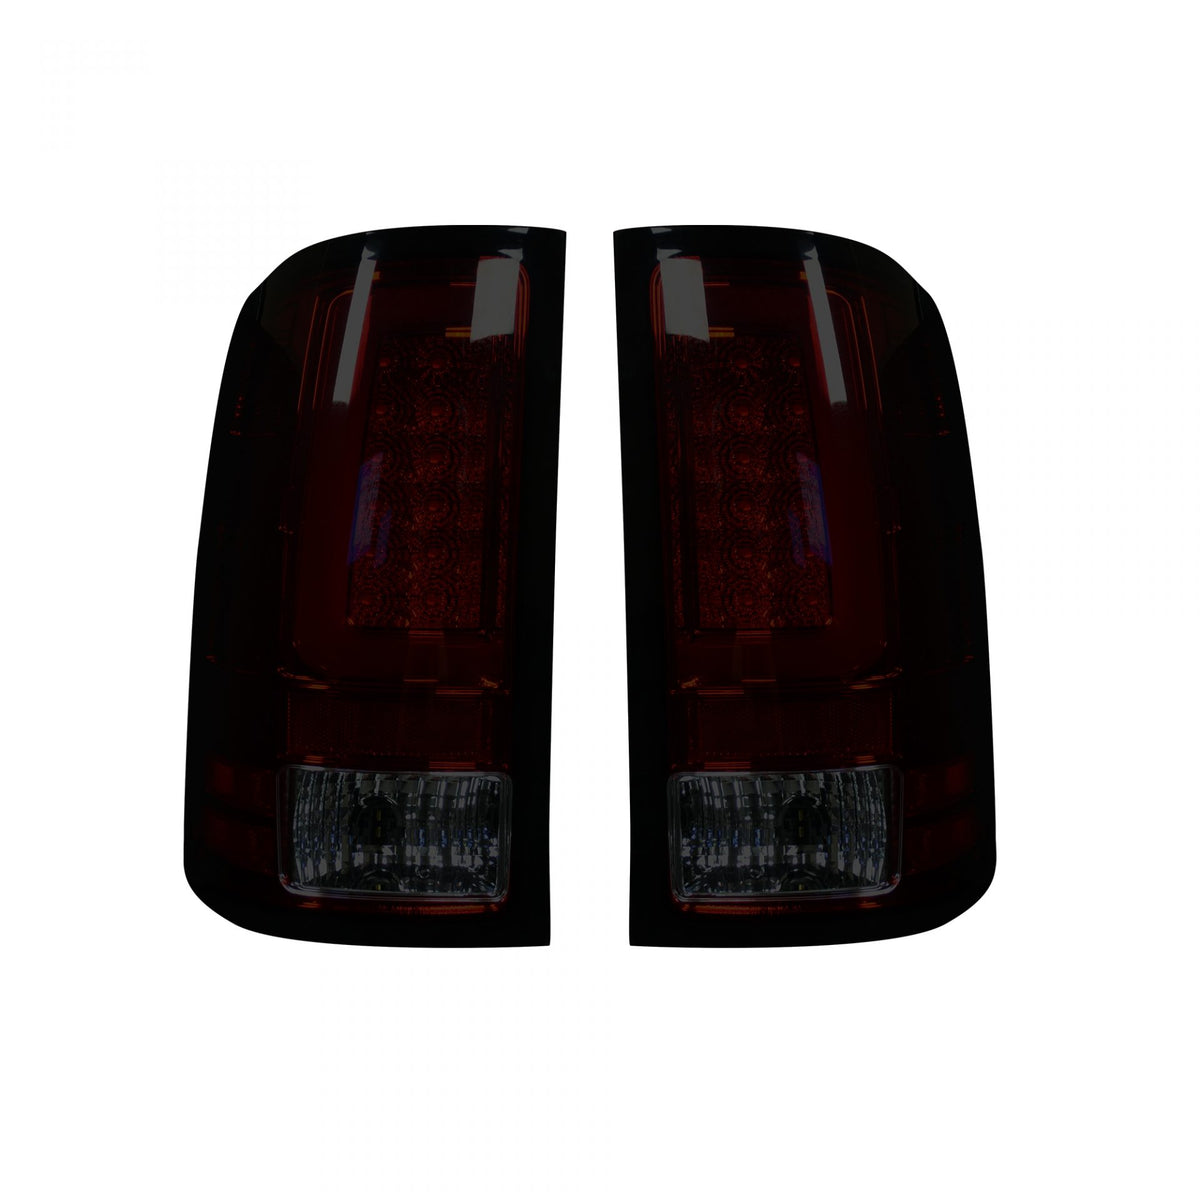 GMC Sierra 07-13 Tail Lights OLED in Smoked